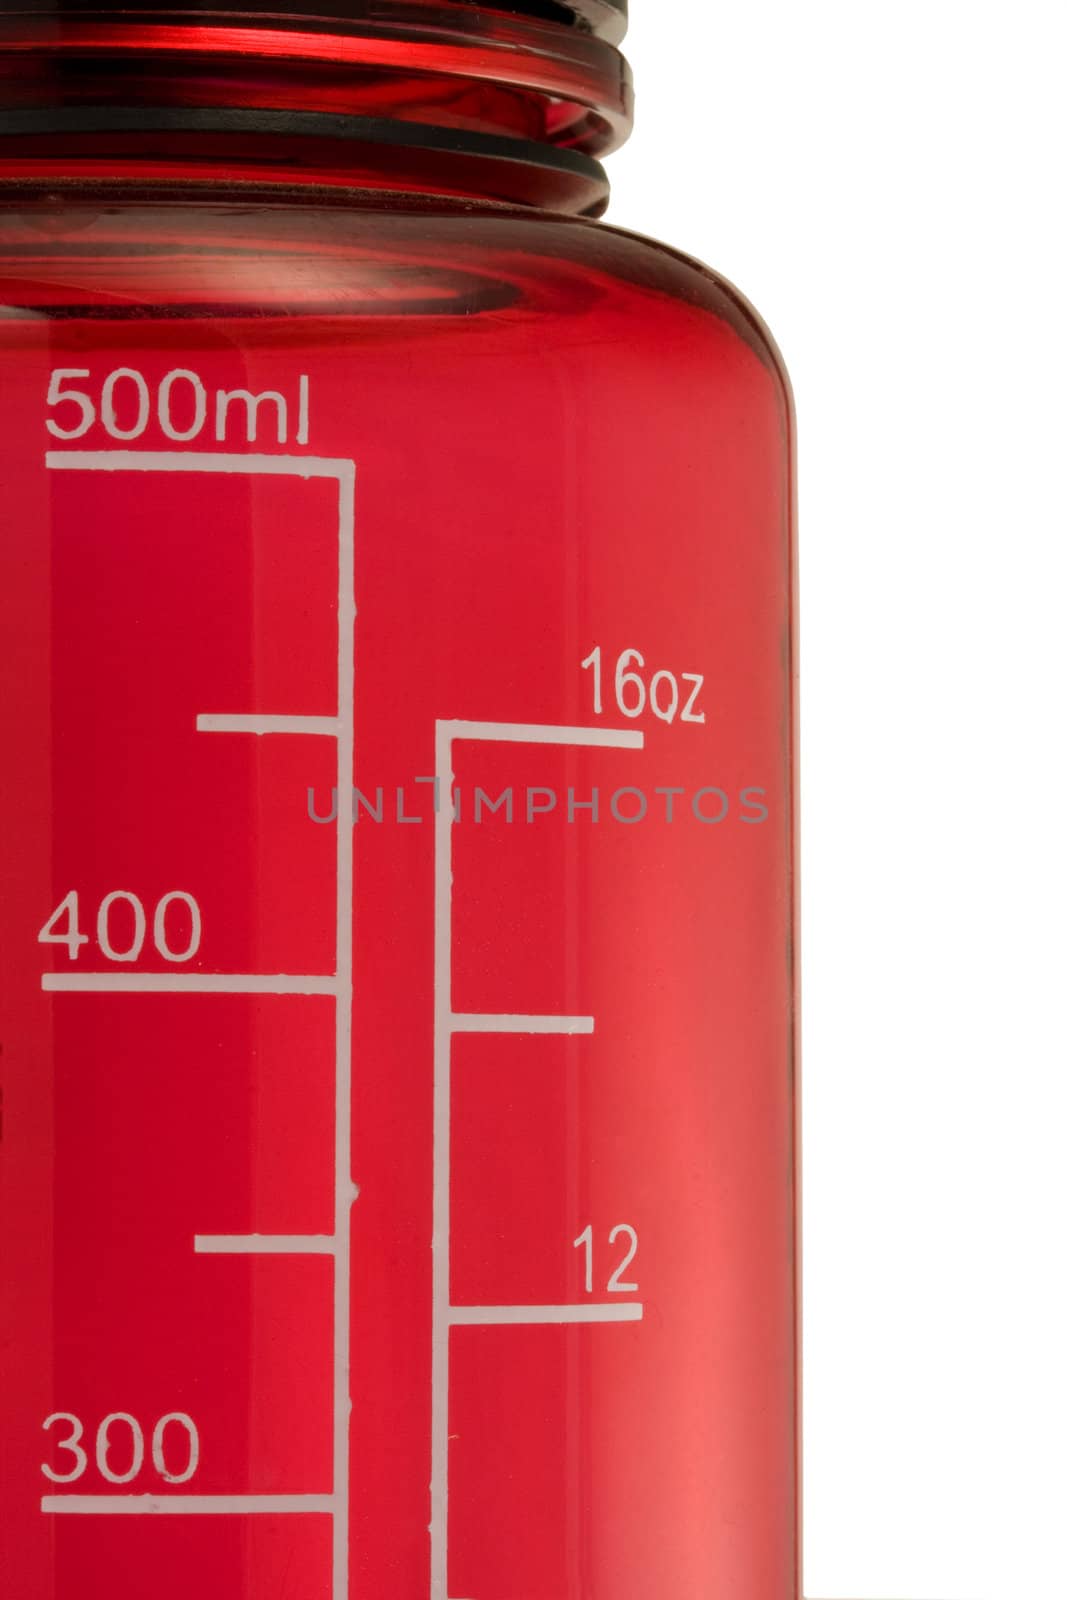 double scale in mililiters and fluid ounces on a drinking bottle by PixelsAway